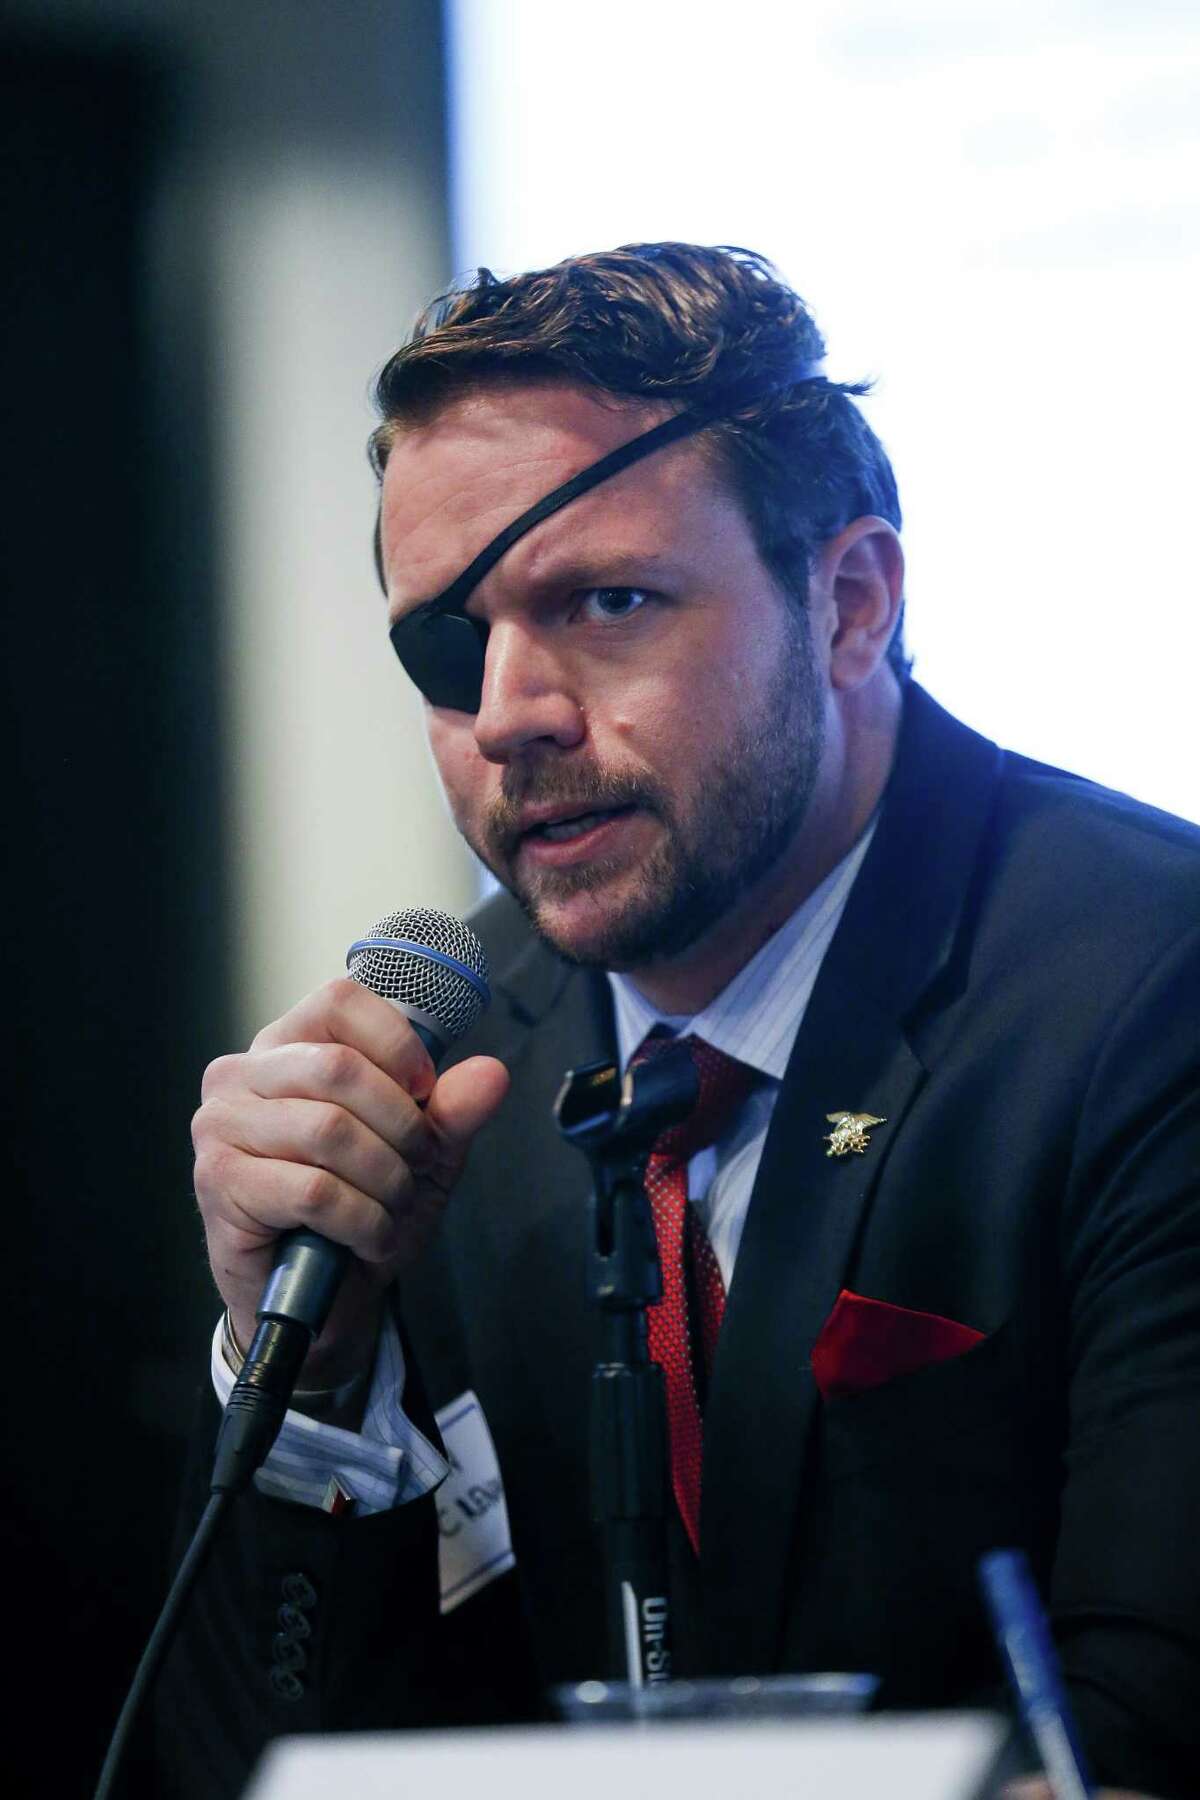 United States Congressional District 2 candidate Dan Crenshaw speaks during the Houston Congressional Candidate Forum at Houston's First Baptist Church Thursday, Jan. 18, 2018 in Houston. ( Michael Ciaglo / Houston Chronicle)